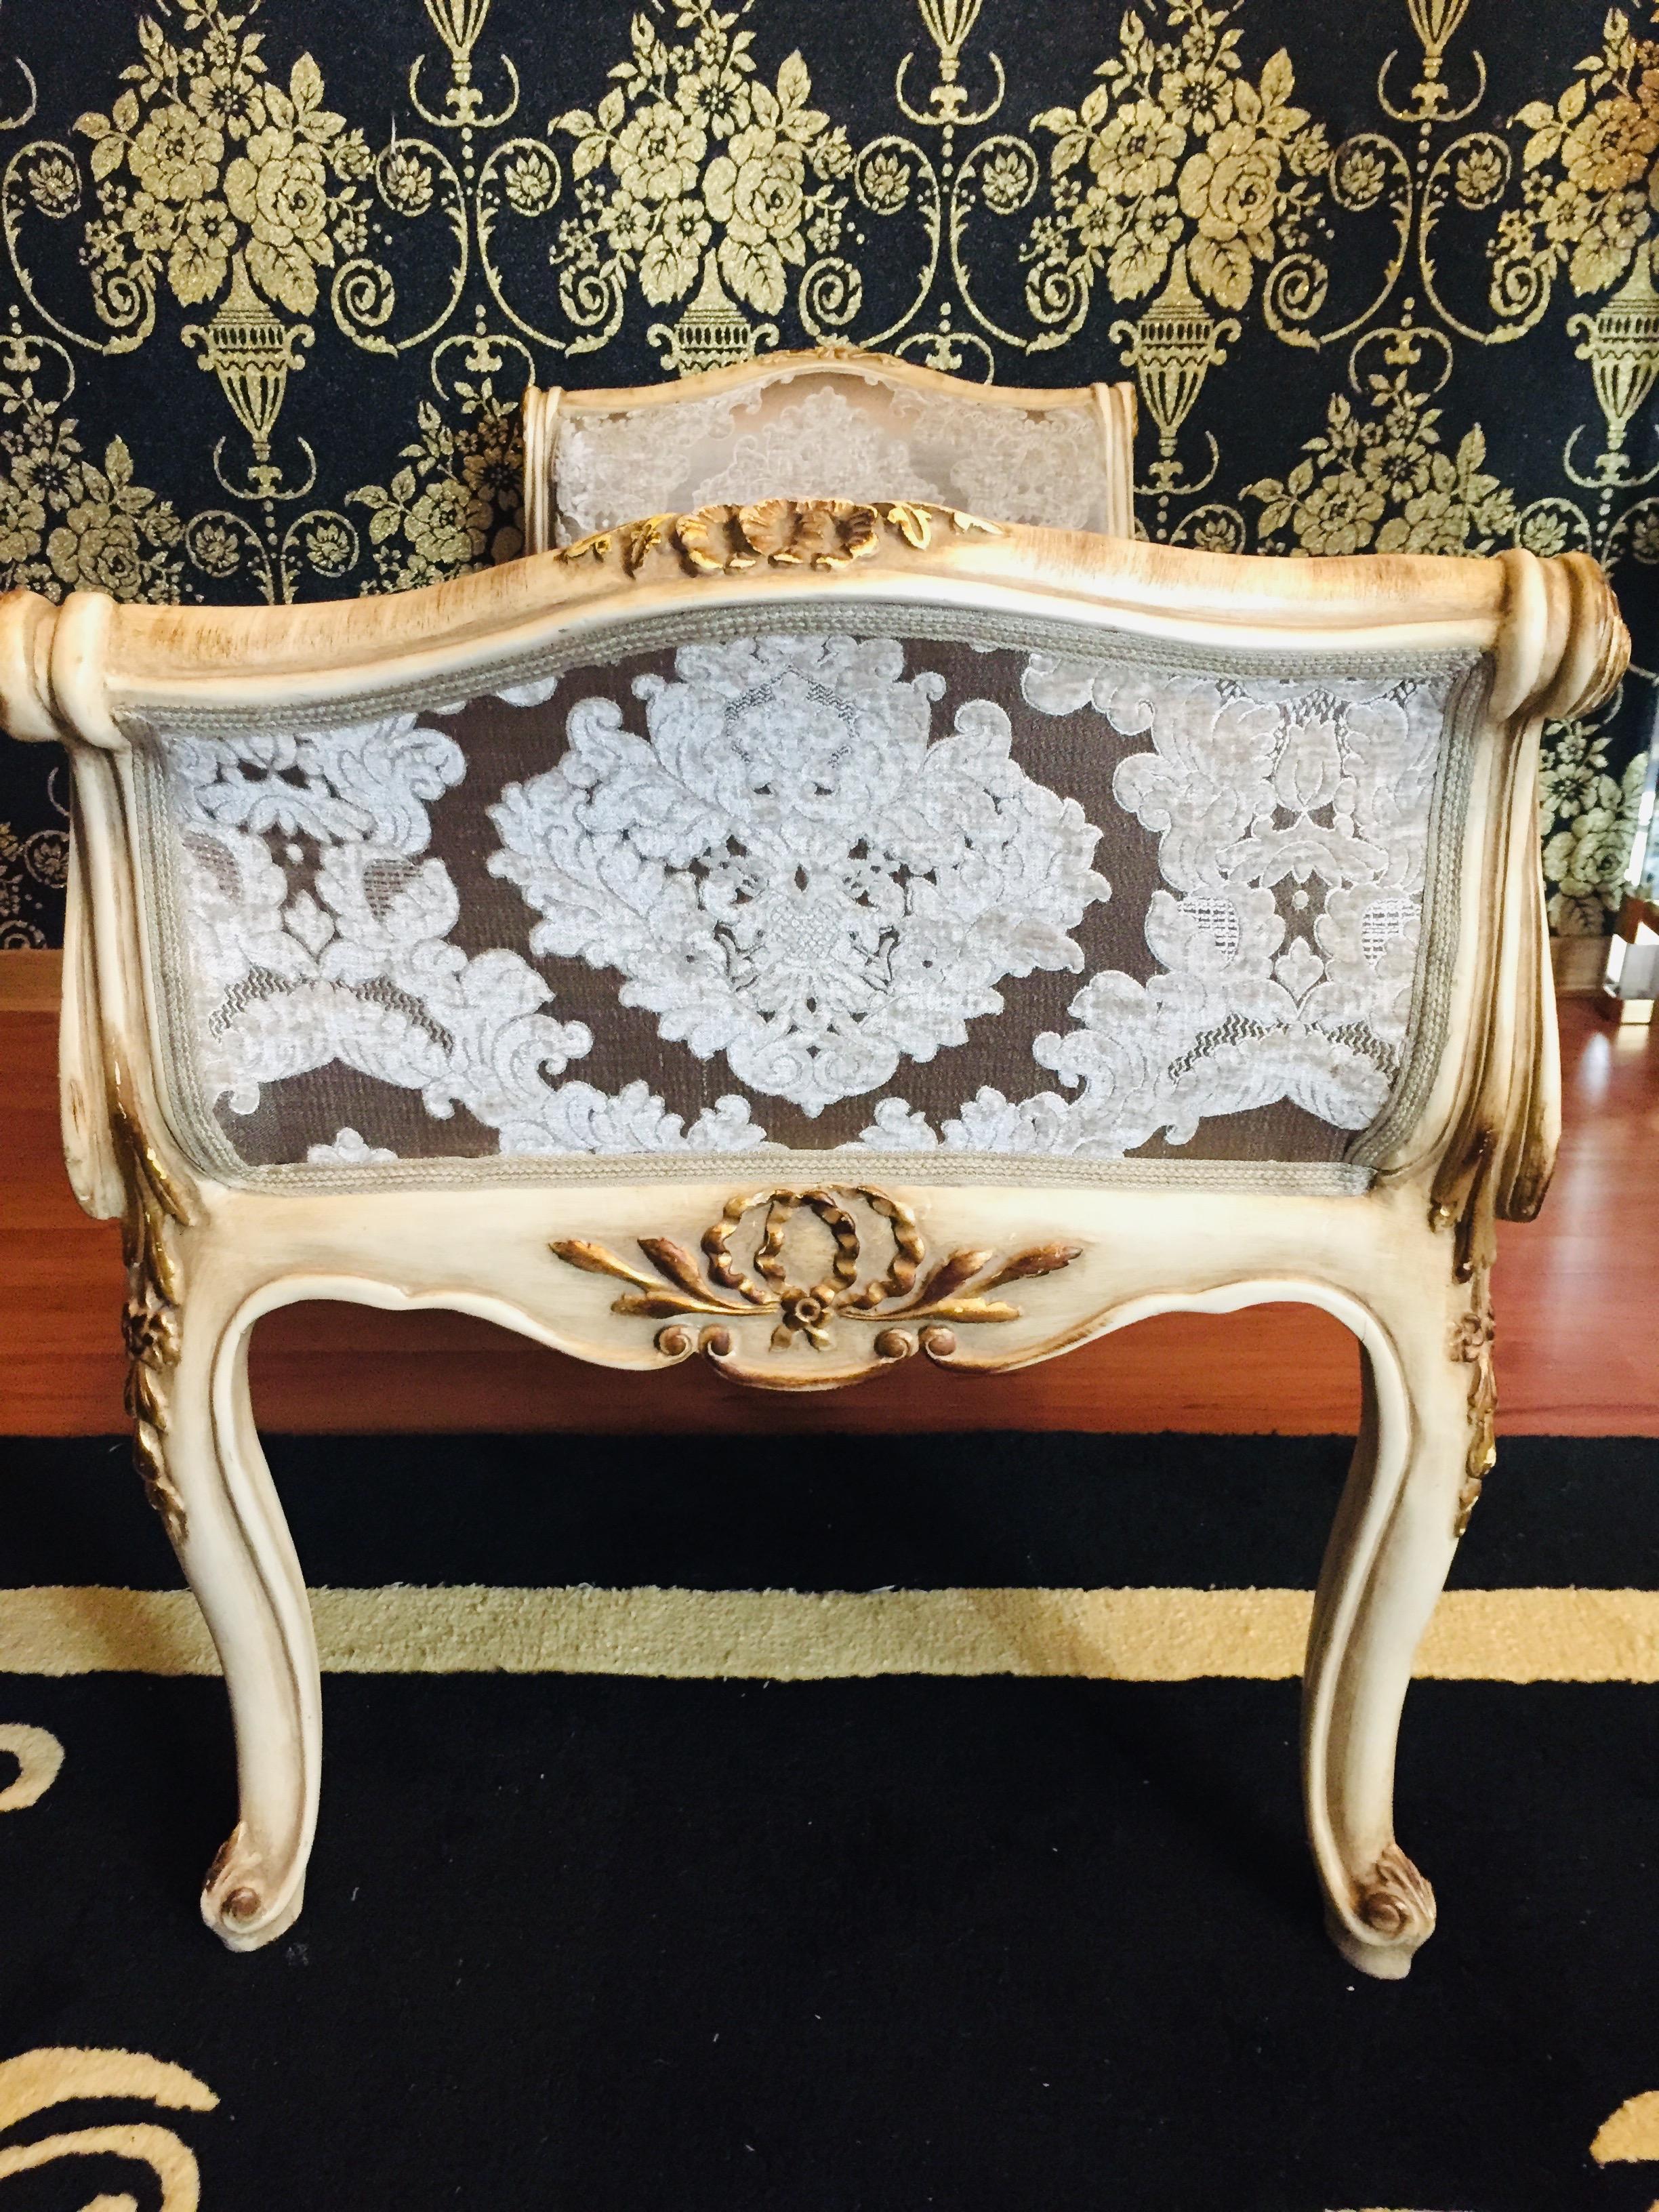 Beech Luxurious French seating Bench Gondola in the antique Louis Seize XVI Style 